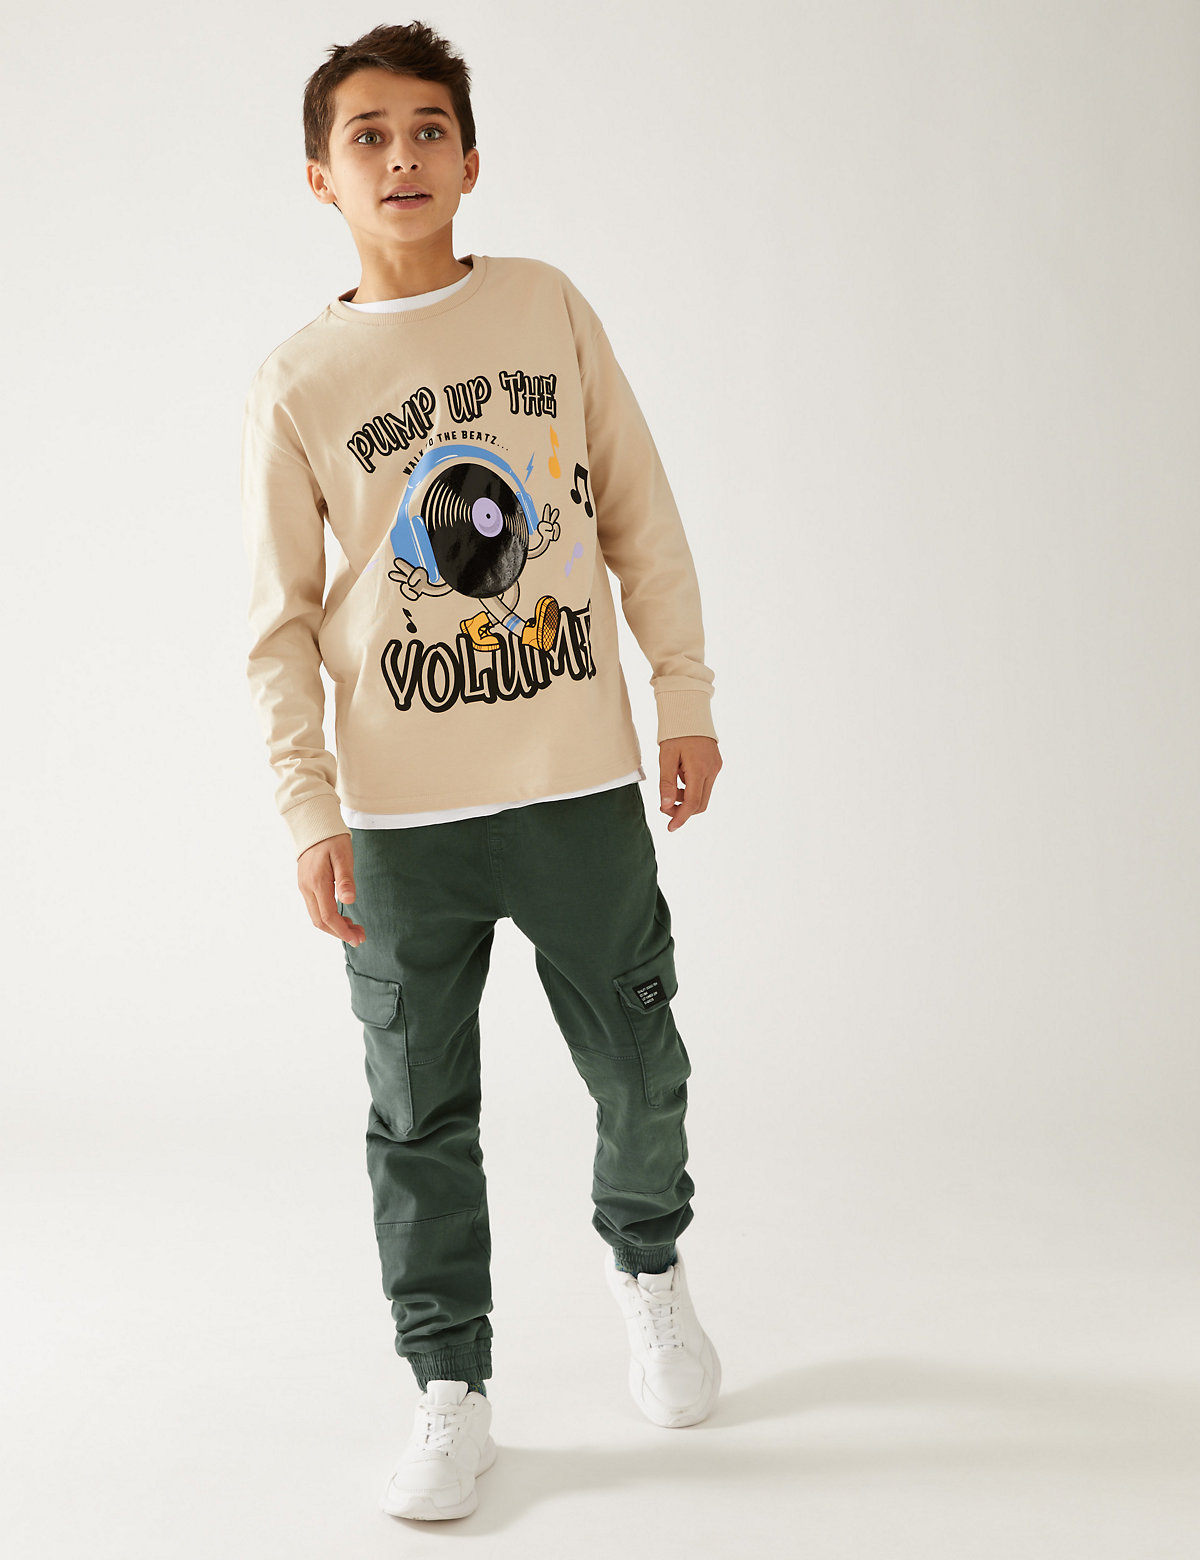 Cotton Rich Woven Cargo Trousers (6-16 Yrs)